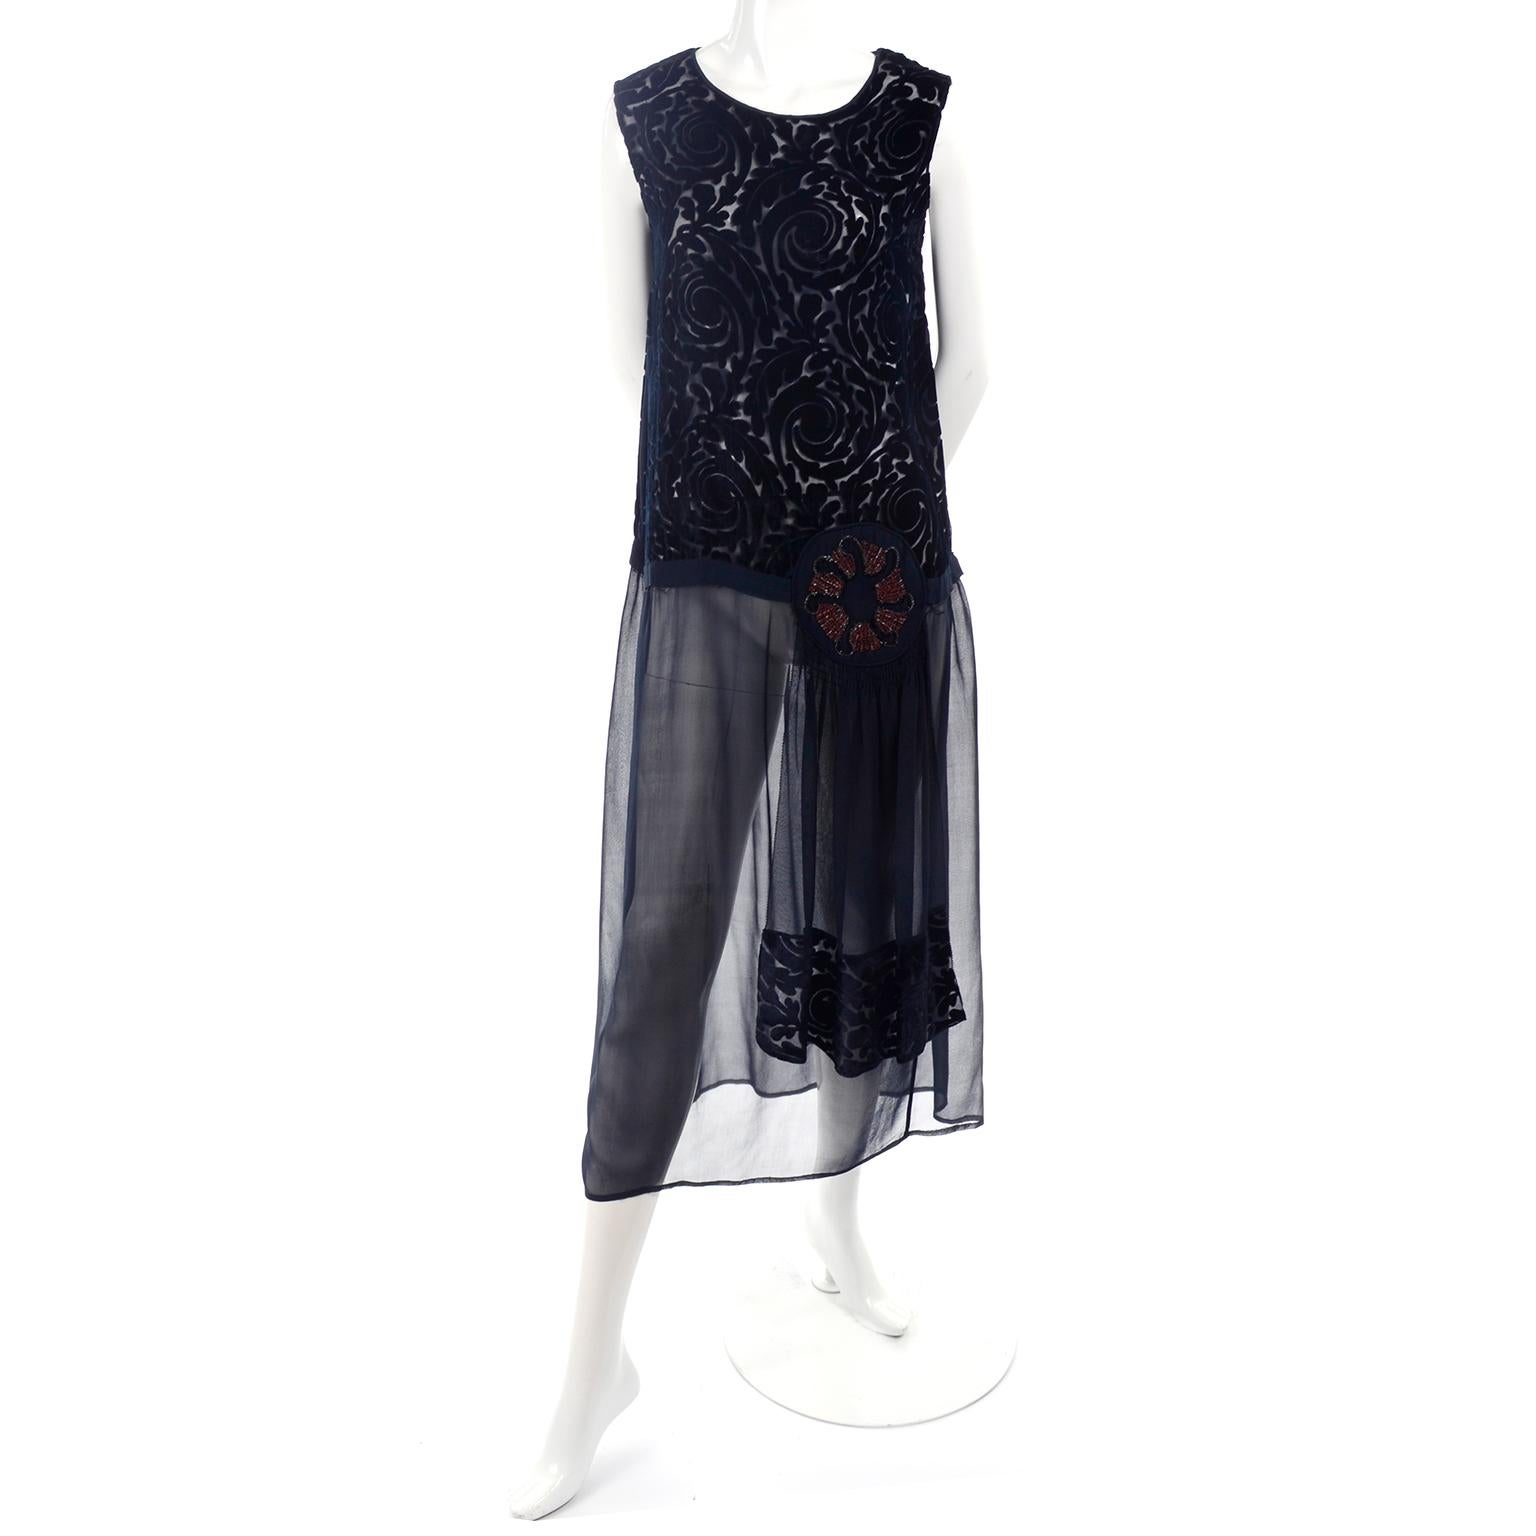 This lovely black 1920's vintage dress has a silk cut velvet bodice and a drop waist that is embellished with a beaded abstract red and gold flower. This fabulous flapper dress has a sheer chiffon skirt and side silk panels. These dresses are meant